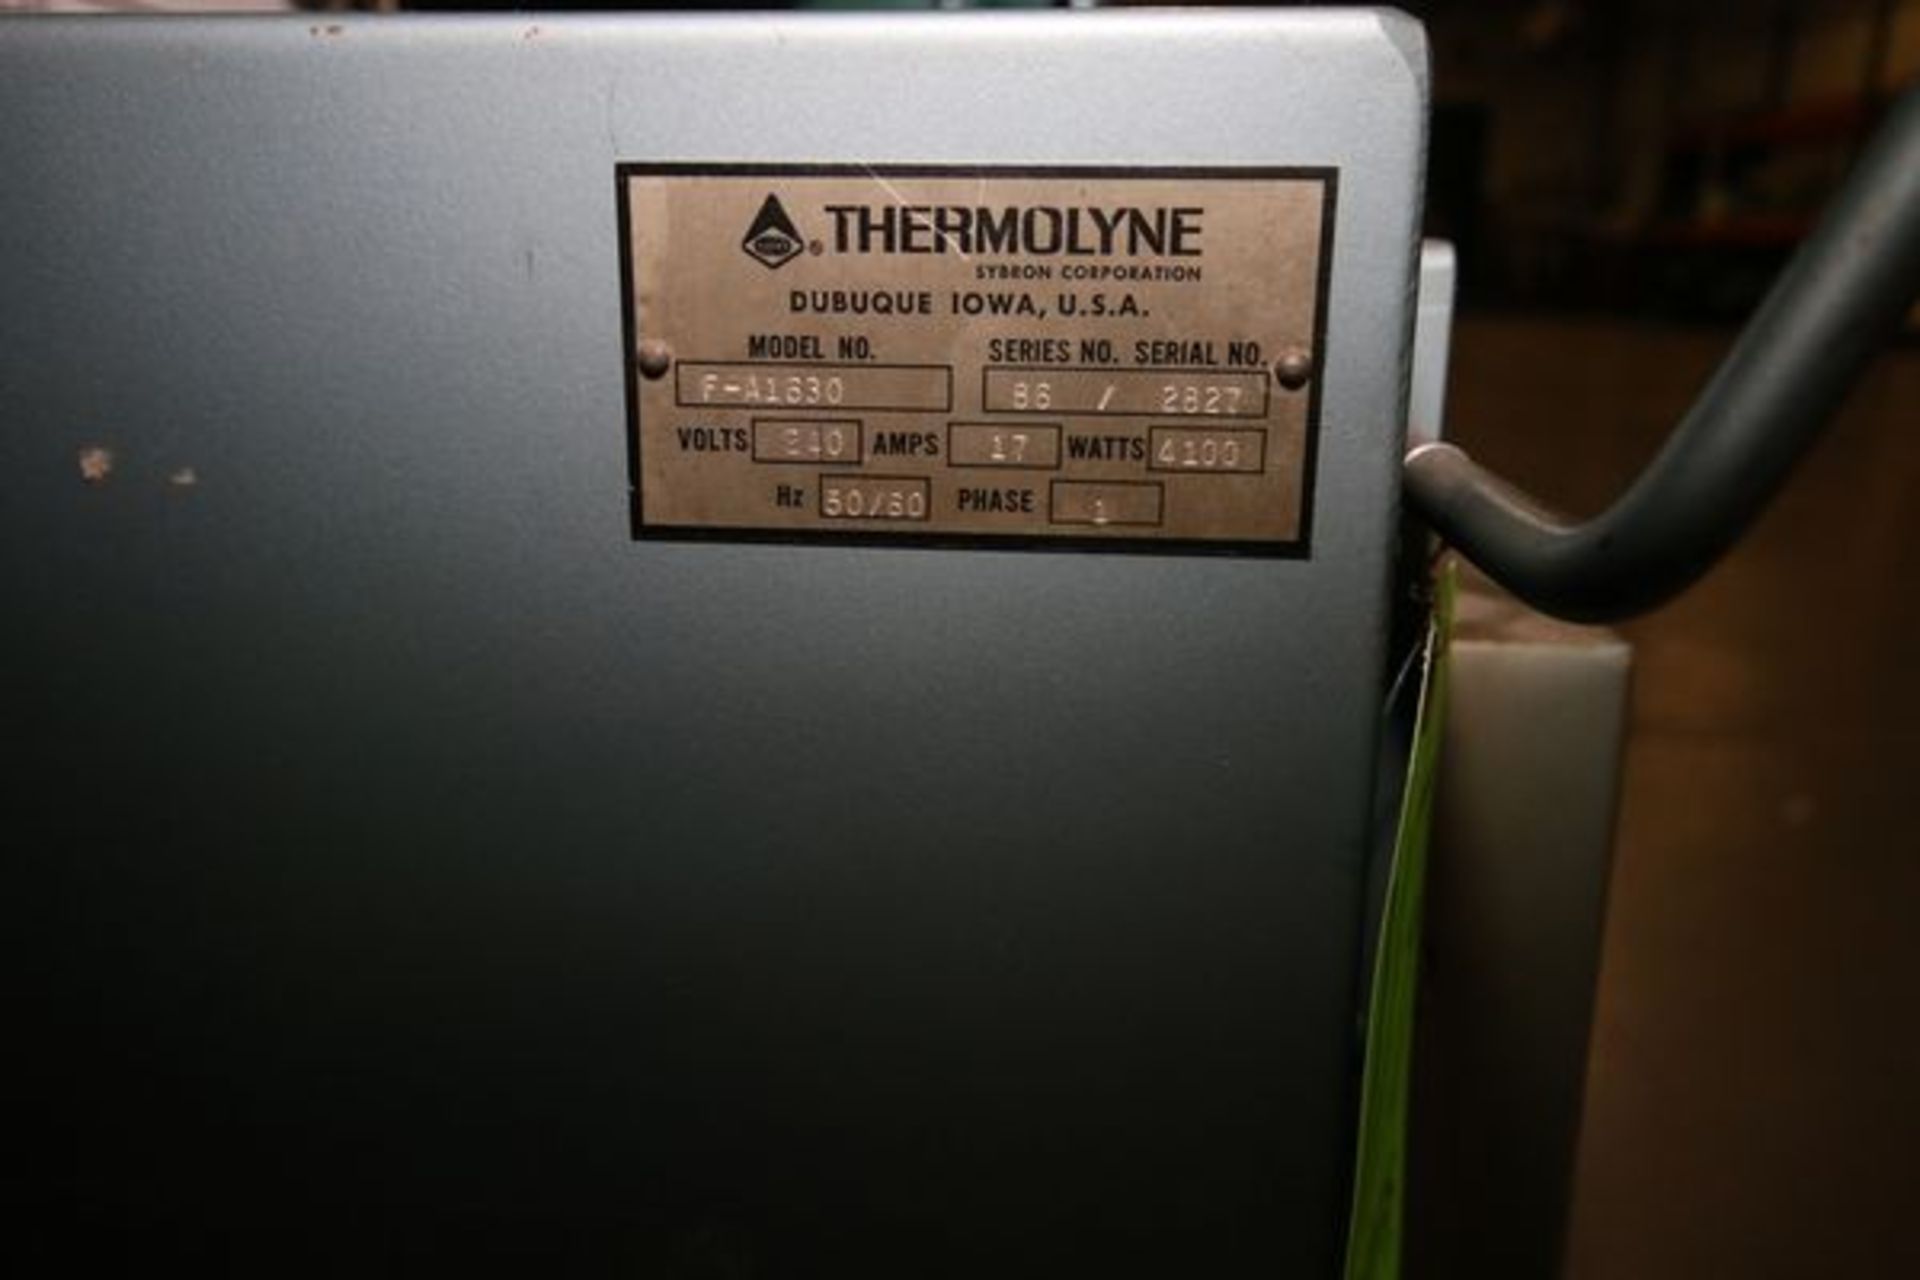 Thermolyne Lab Oven, M/N F-A1630, S/N 2827, 240V - Image 3 of 4